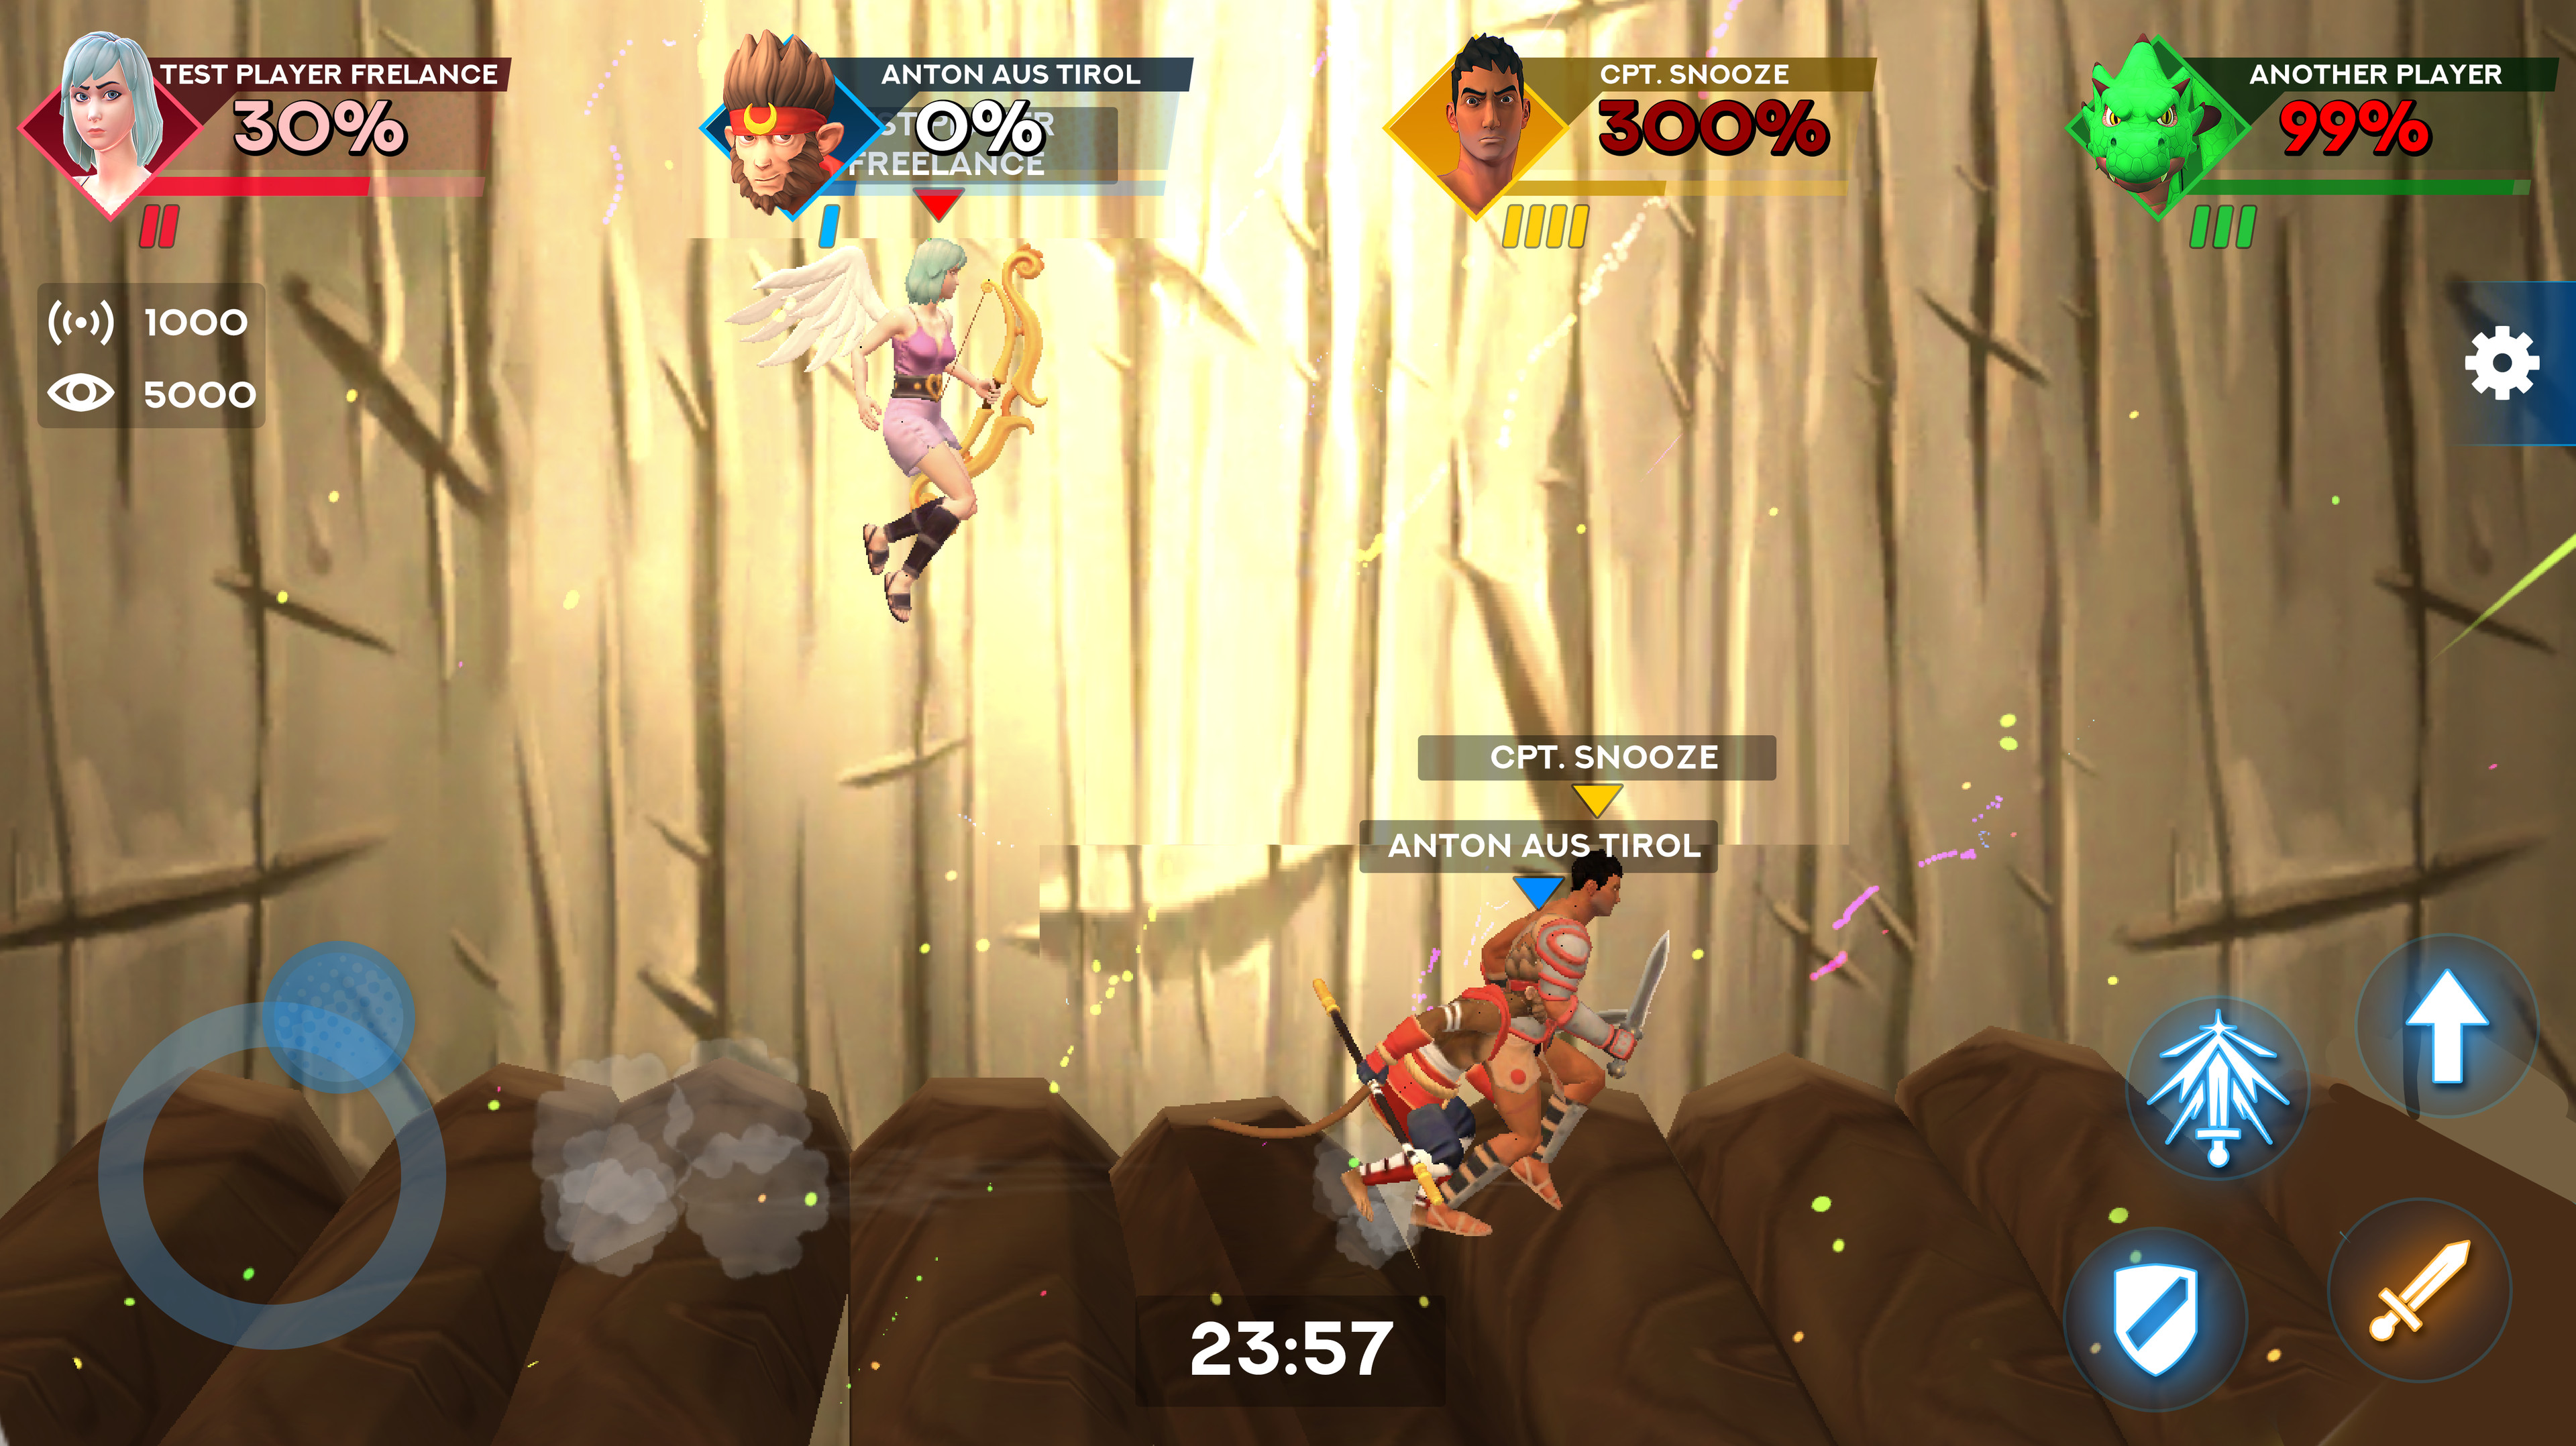 Battle UI, the elements in the corners can be scaled up or down in the game 